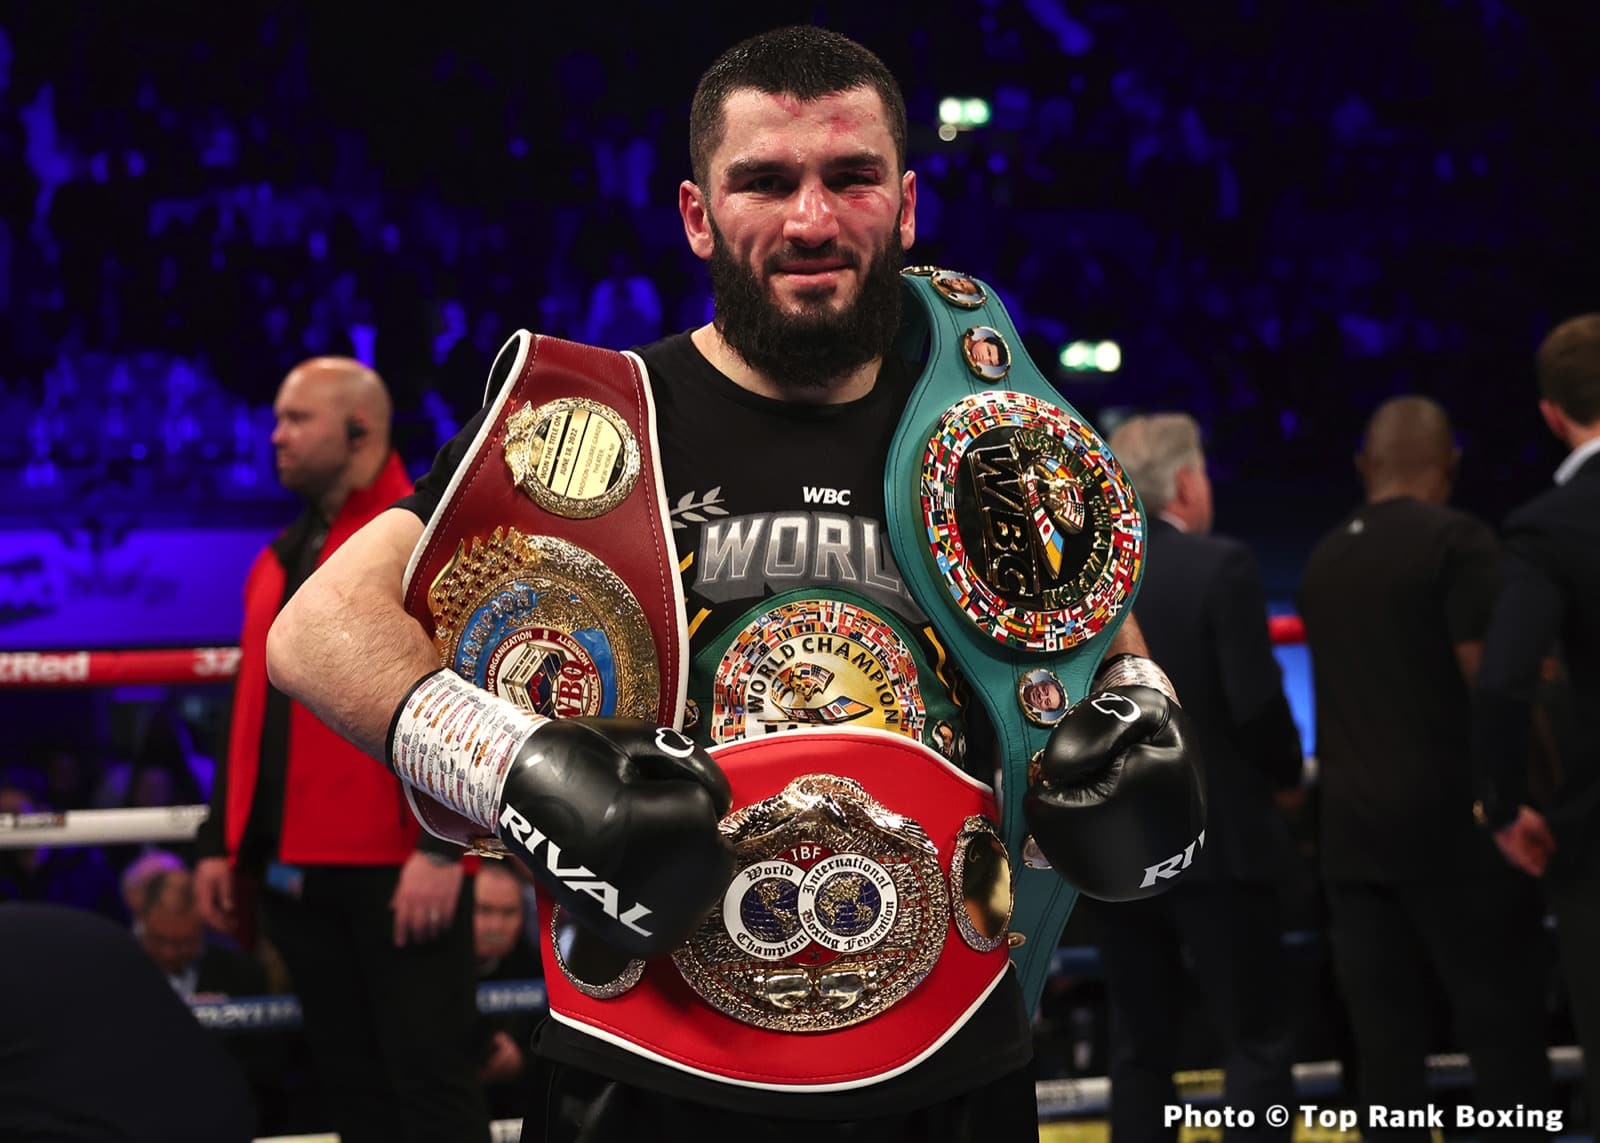 Artur Beterbiev stops Anthony Yarde in 8th round - Boxing Results